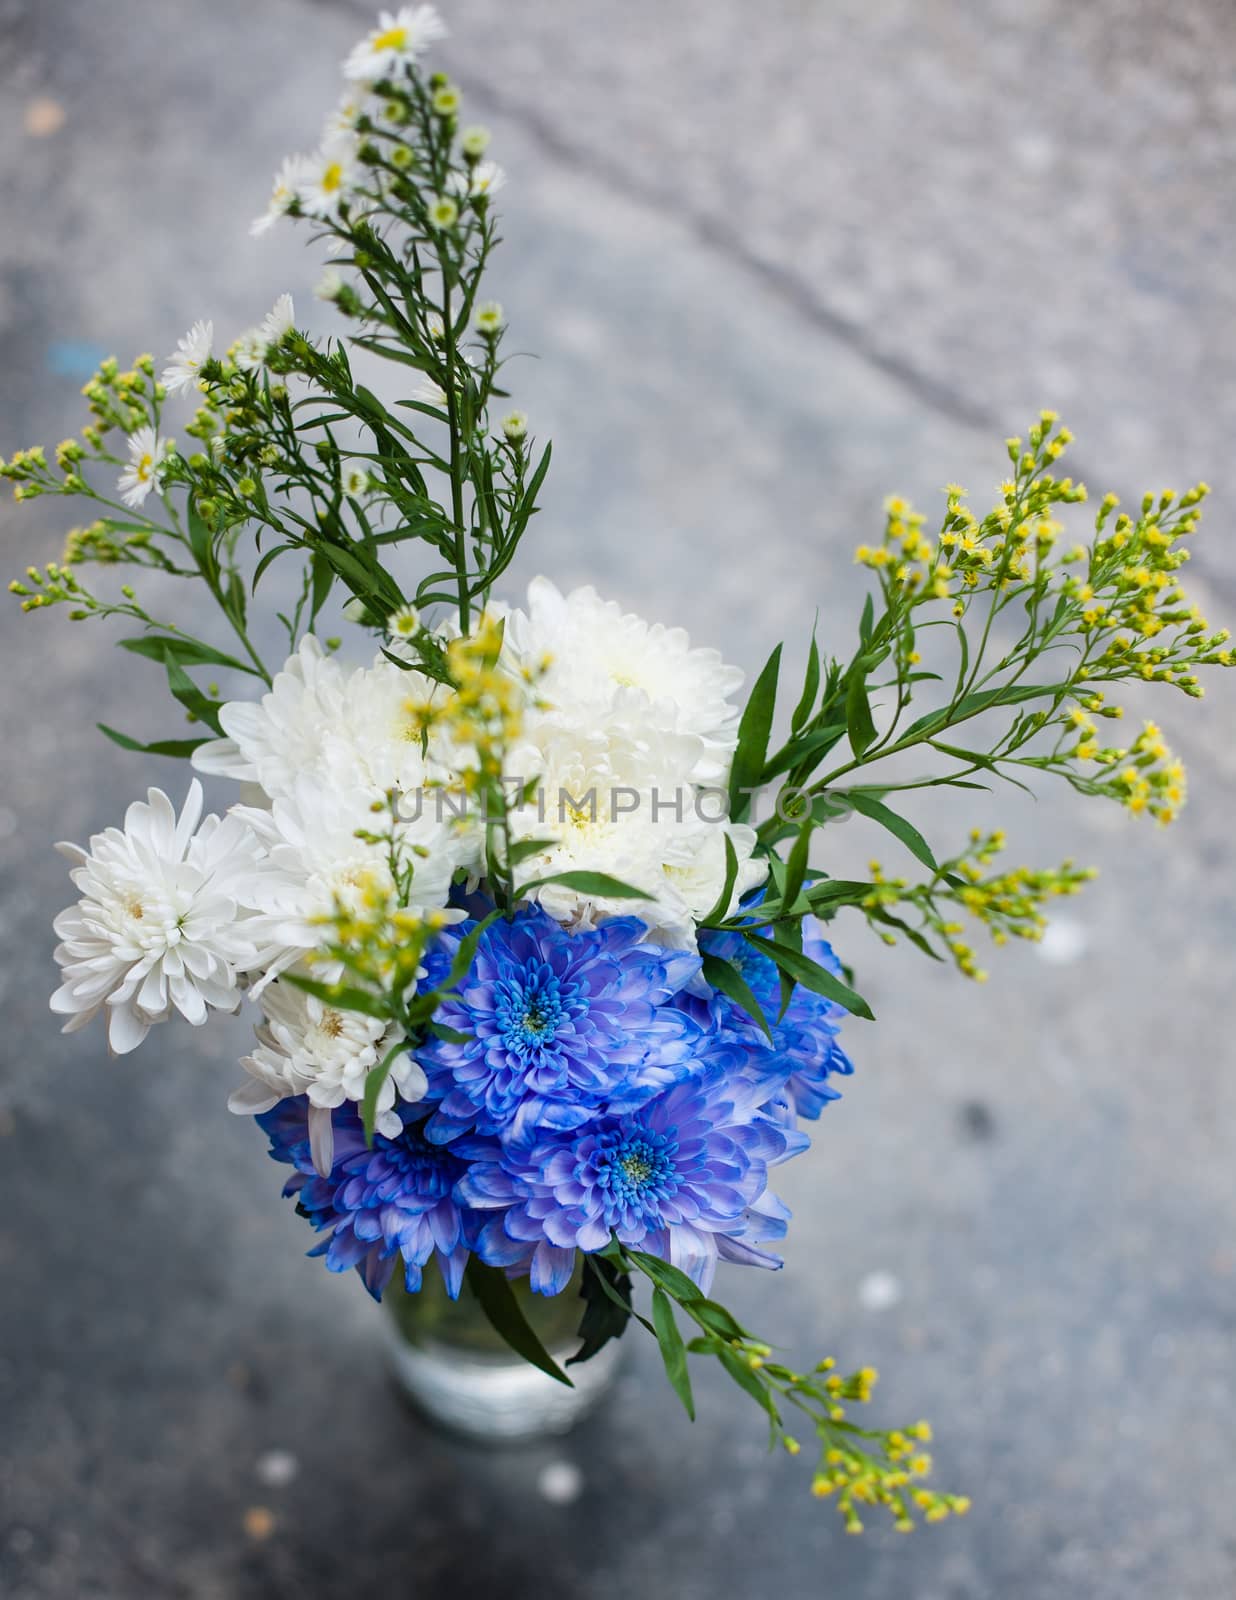 A simple bouquet of flowers in a vase on the pavement by Vanzyst